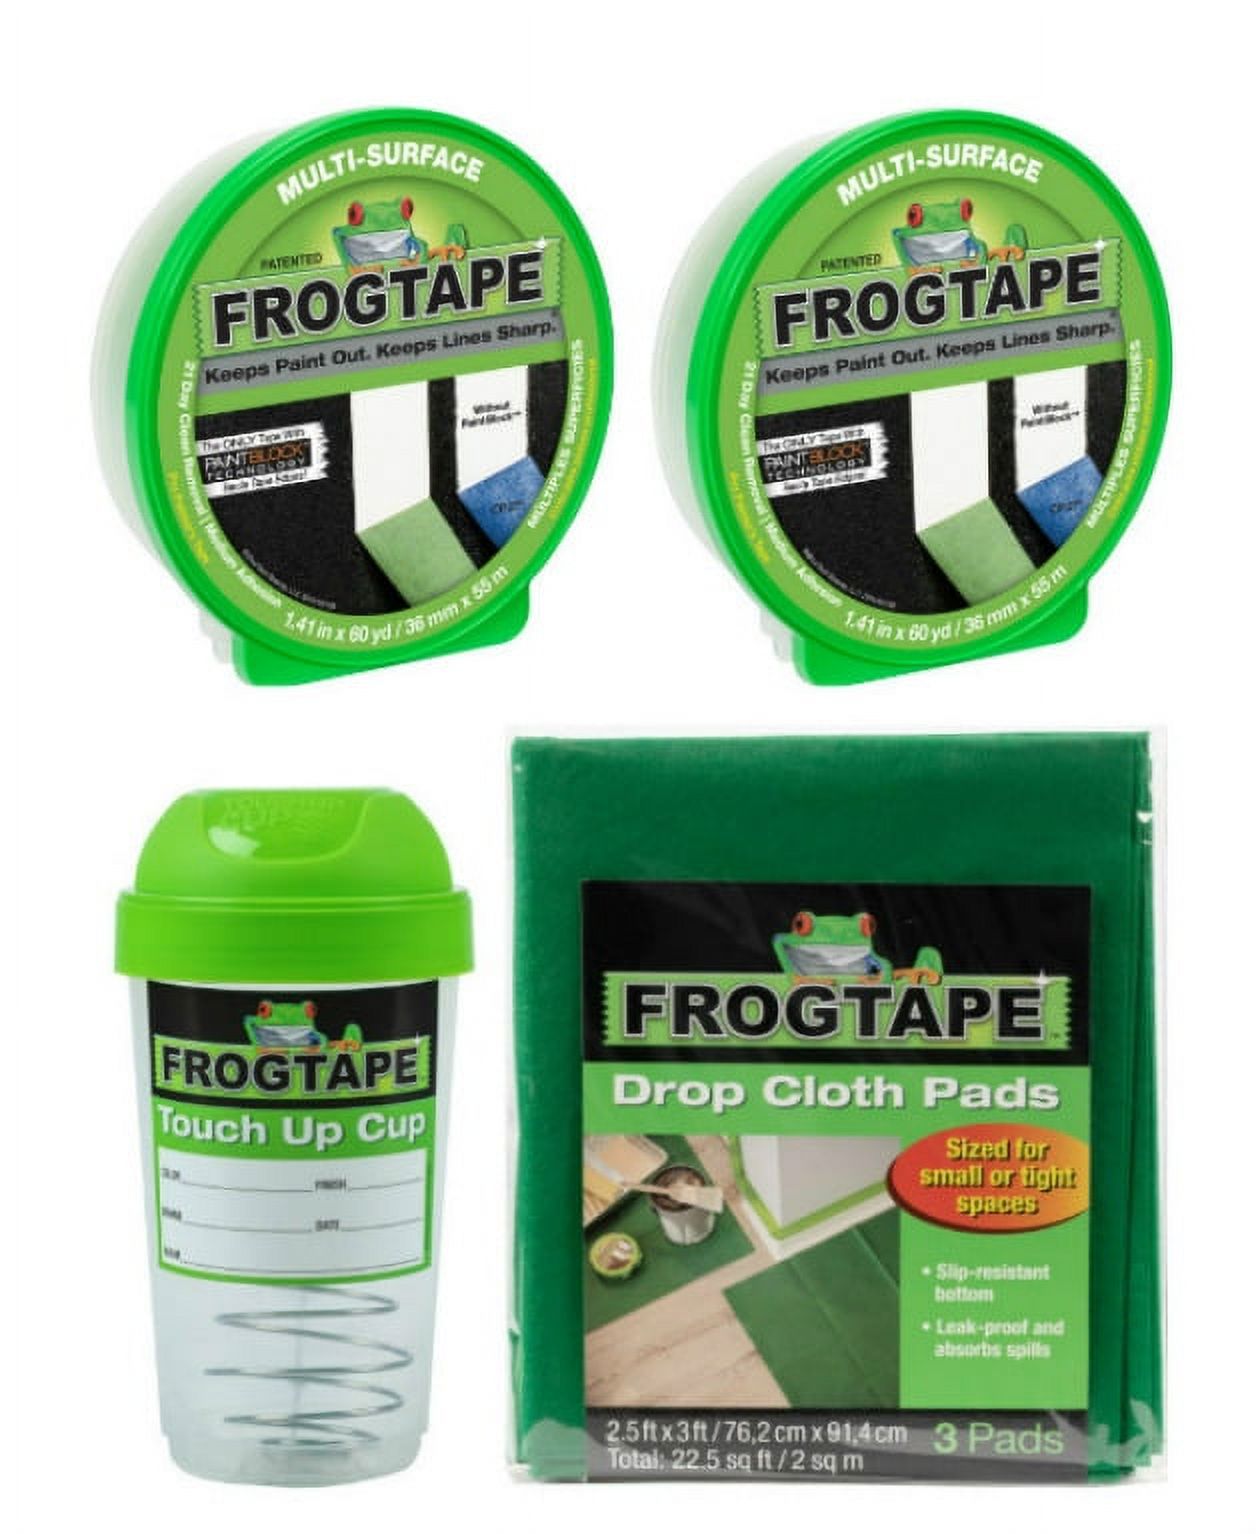 FrogTape Medium Paint Project Prep Pack -- 2 Rolls Multi-Surface Painters Tape, 1.41 in. x 60 yd., Touch up Storage Cup and 3 Drop Cloths - image 1 of 10